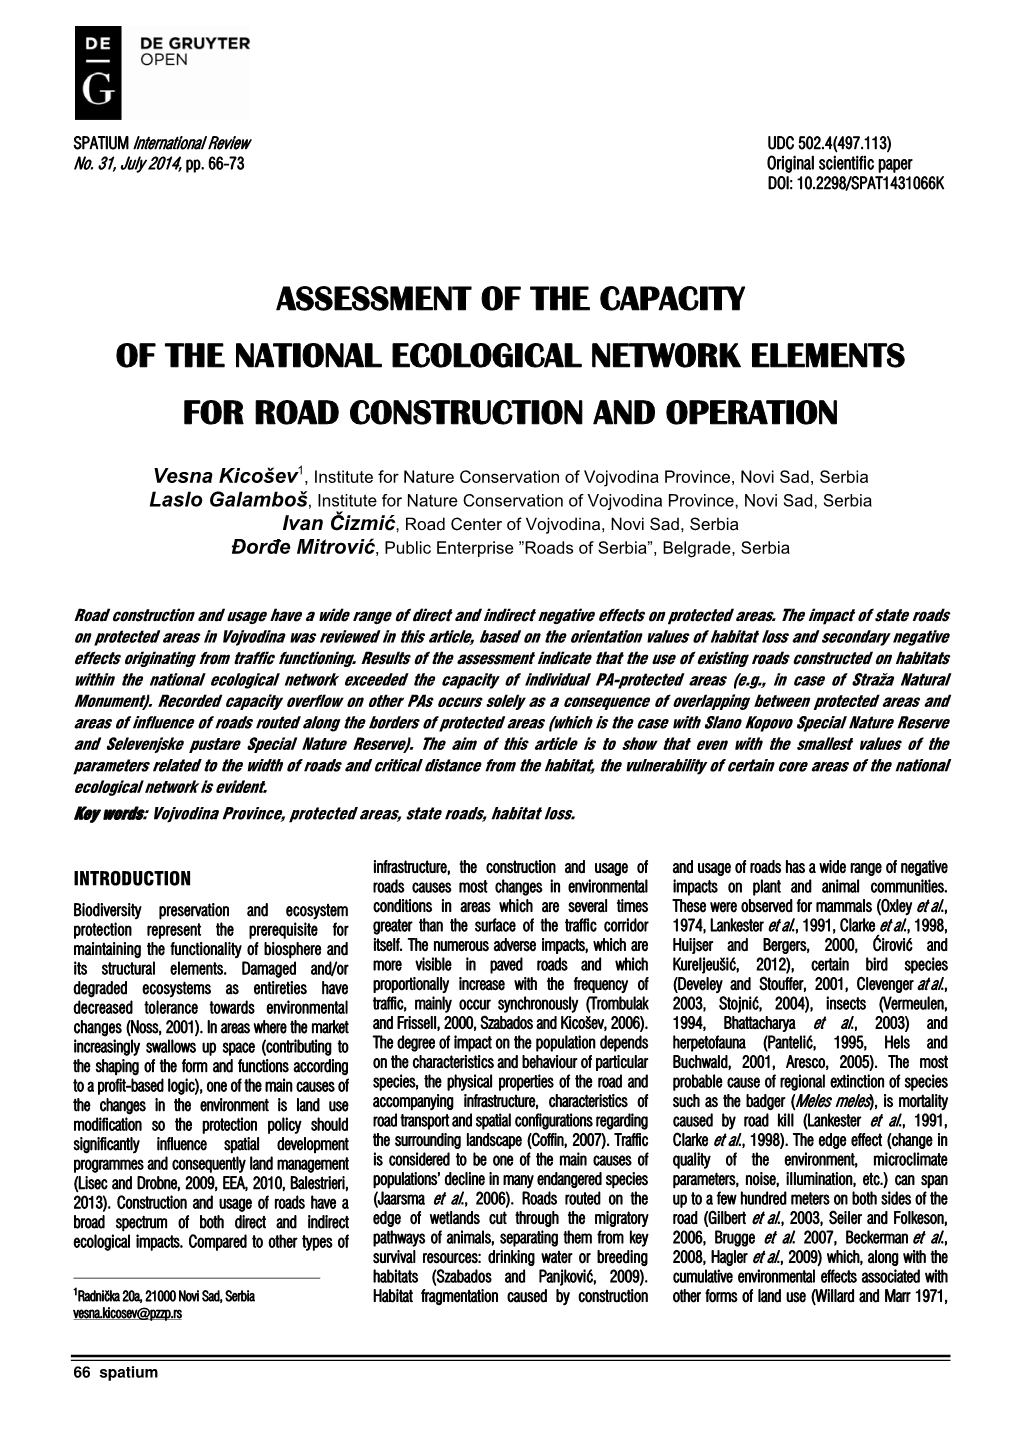 Assessment of the Capacity of the National Ecological Network Elements for Road Construction and Operation